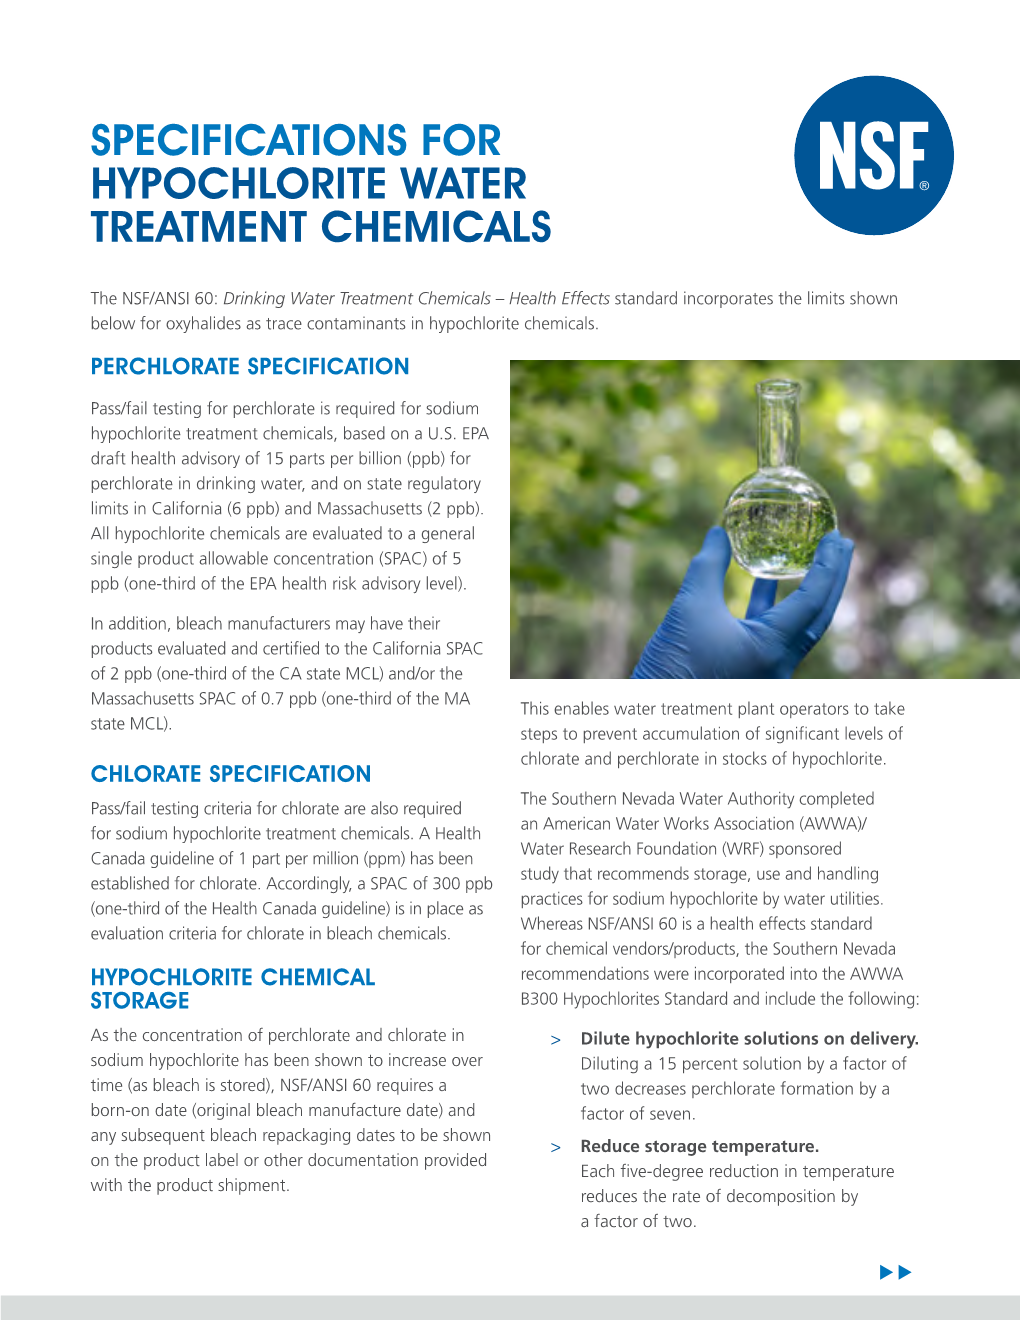 Specifications for Hypochlorite Water Treatment Chemicals